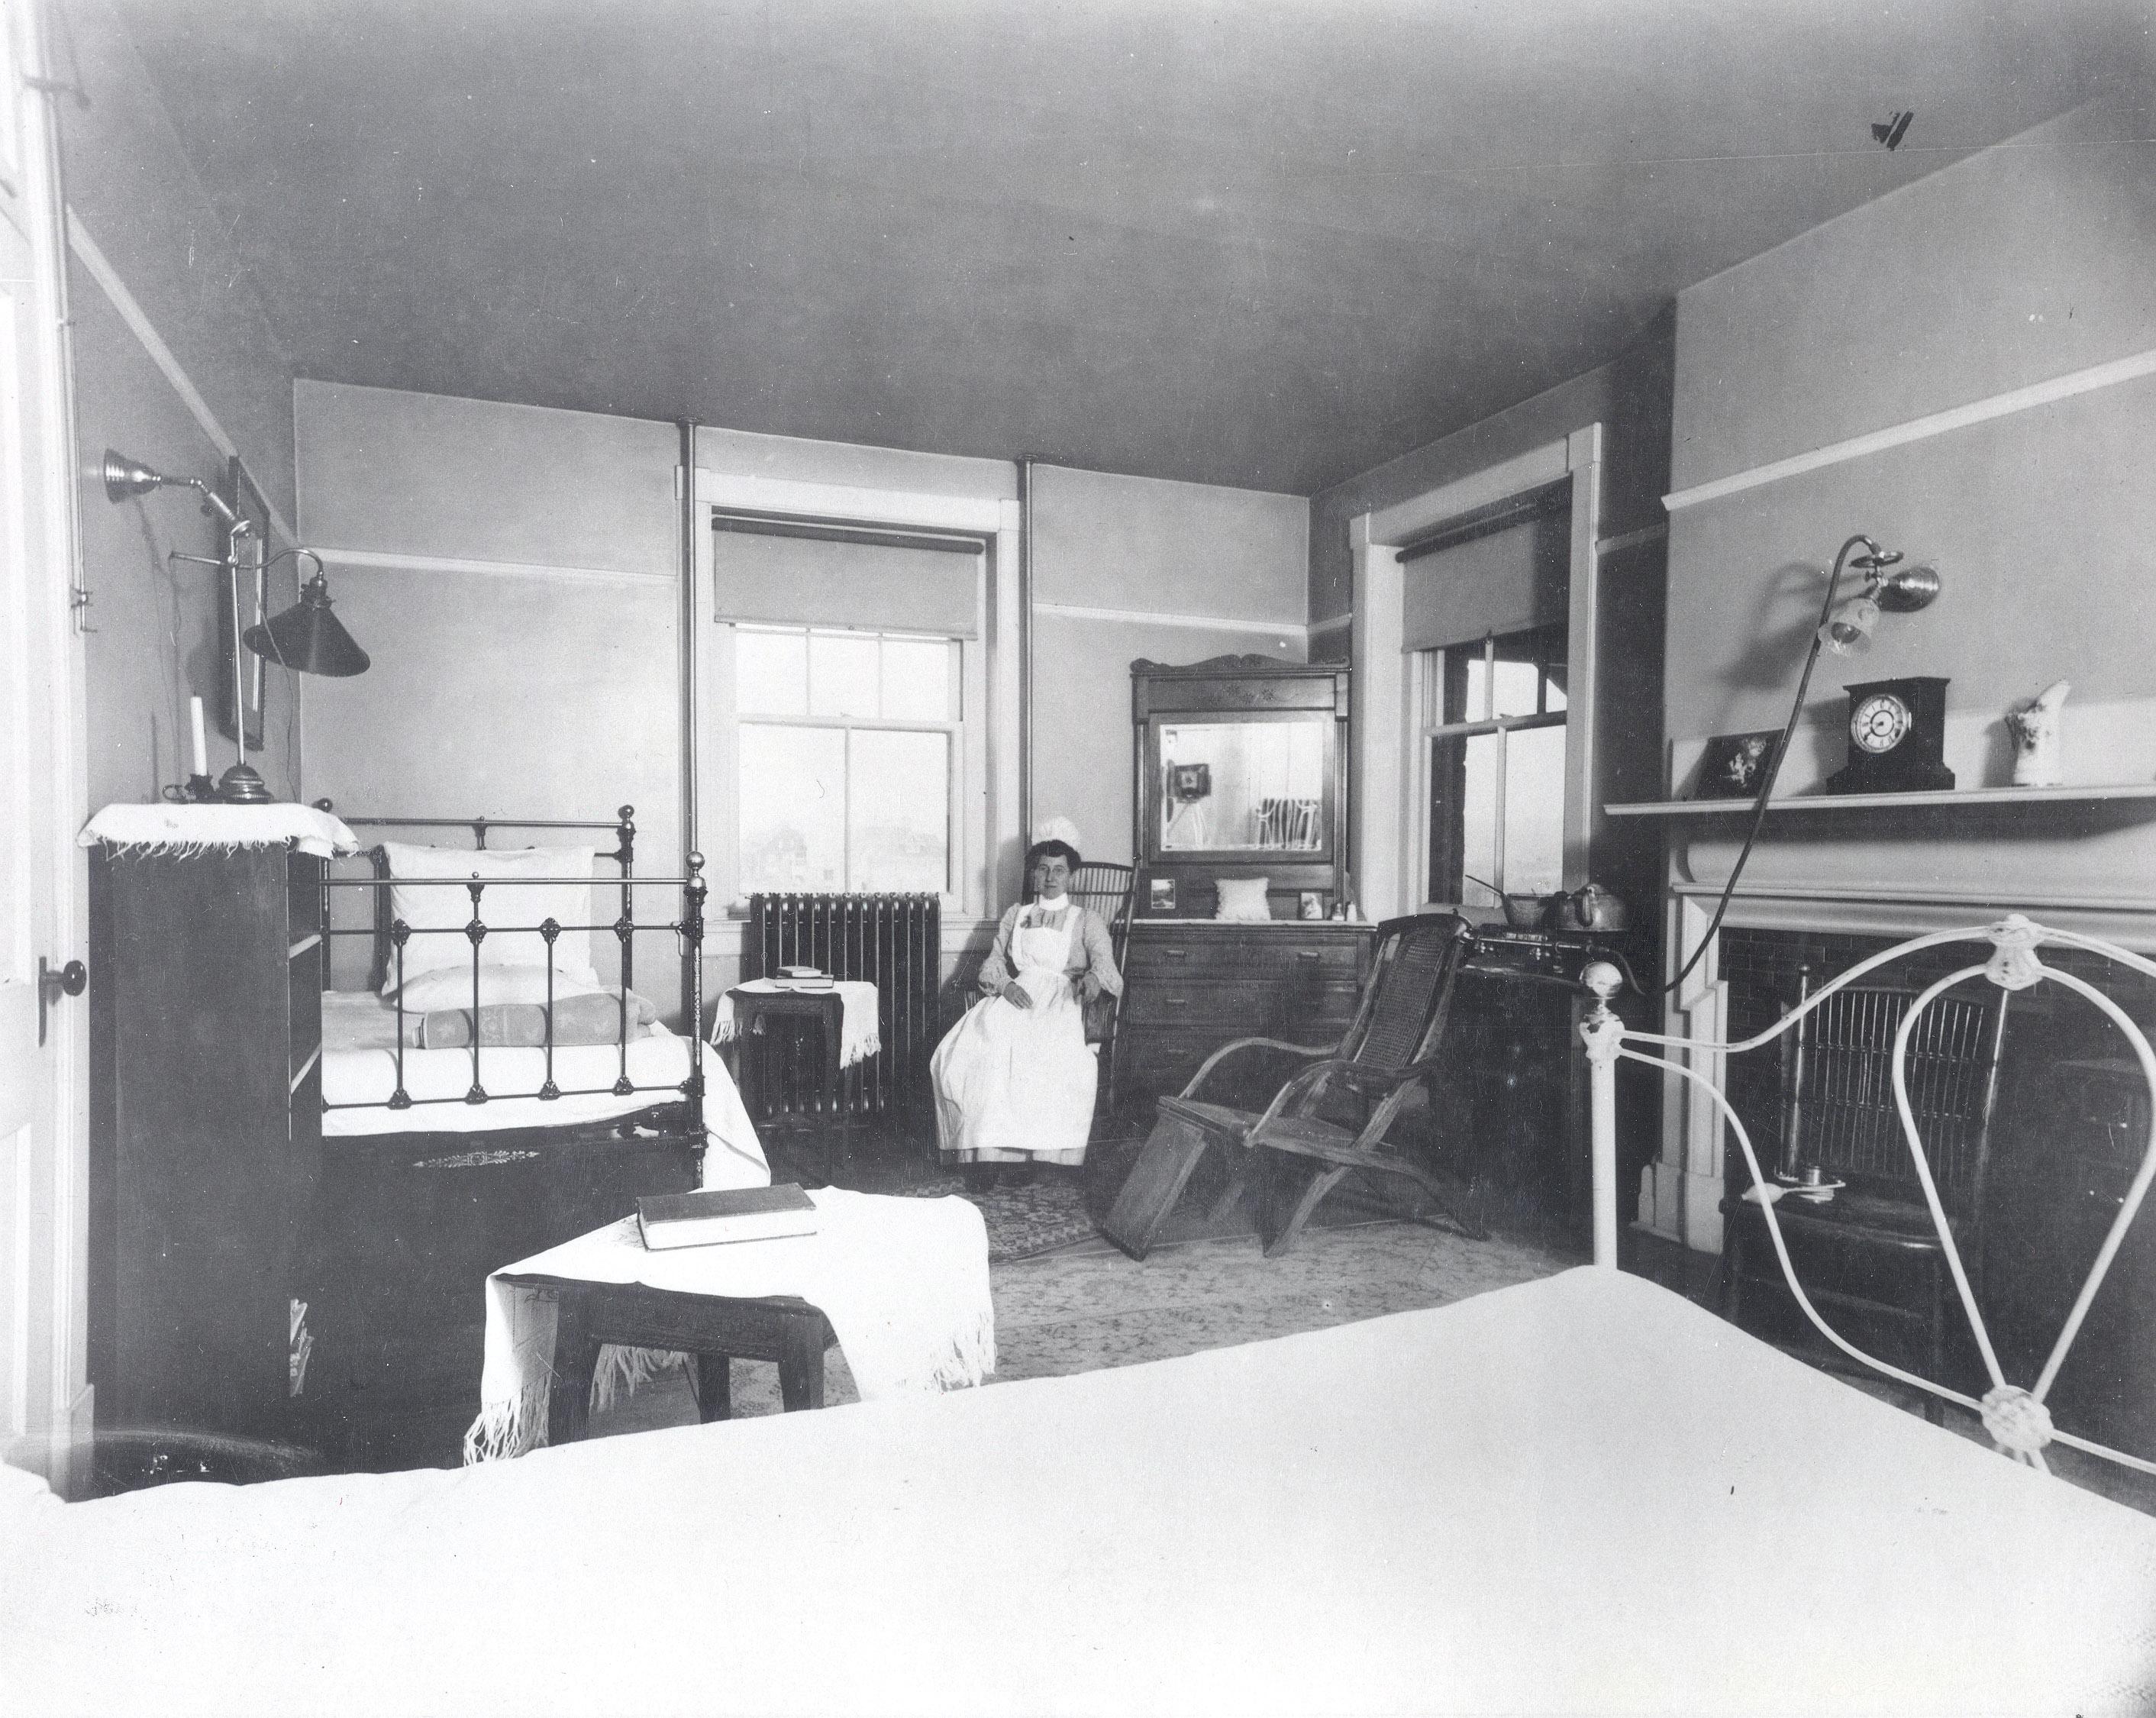 Ticknor大厅 Infirmary Room Early 1900s <span class="cc-gallery-credit"></span>